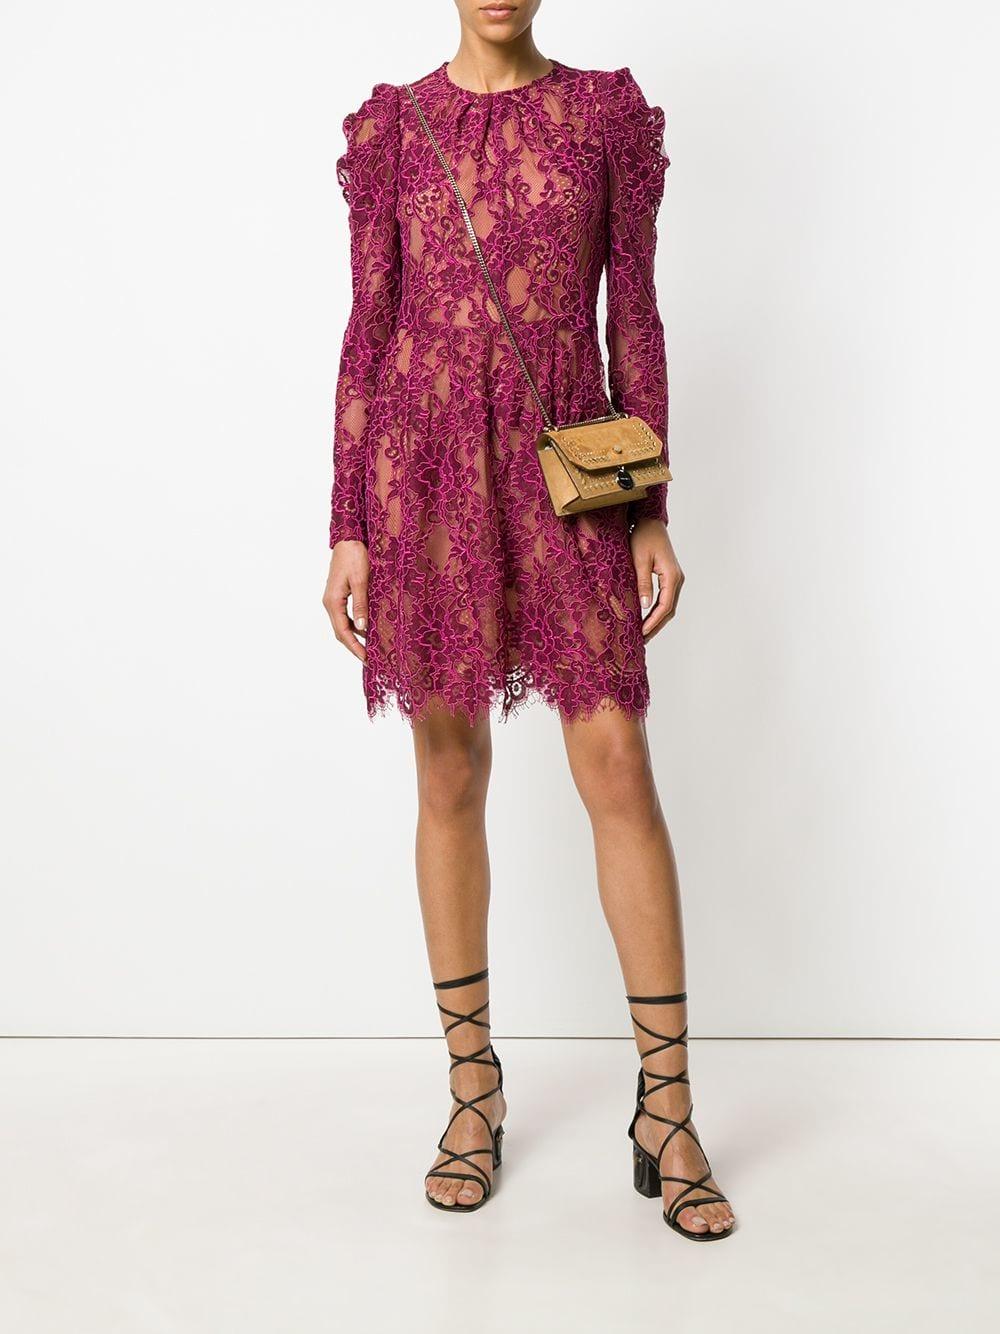 MICHAEL Michael Kors Scalloped Floral Lace Dress in Pink - Lyst